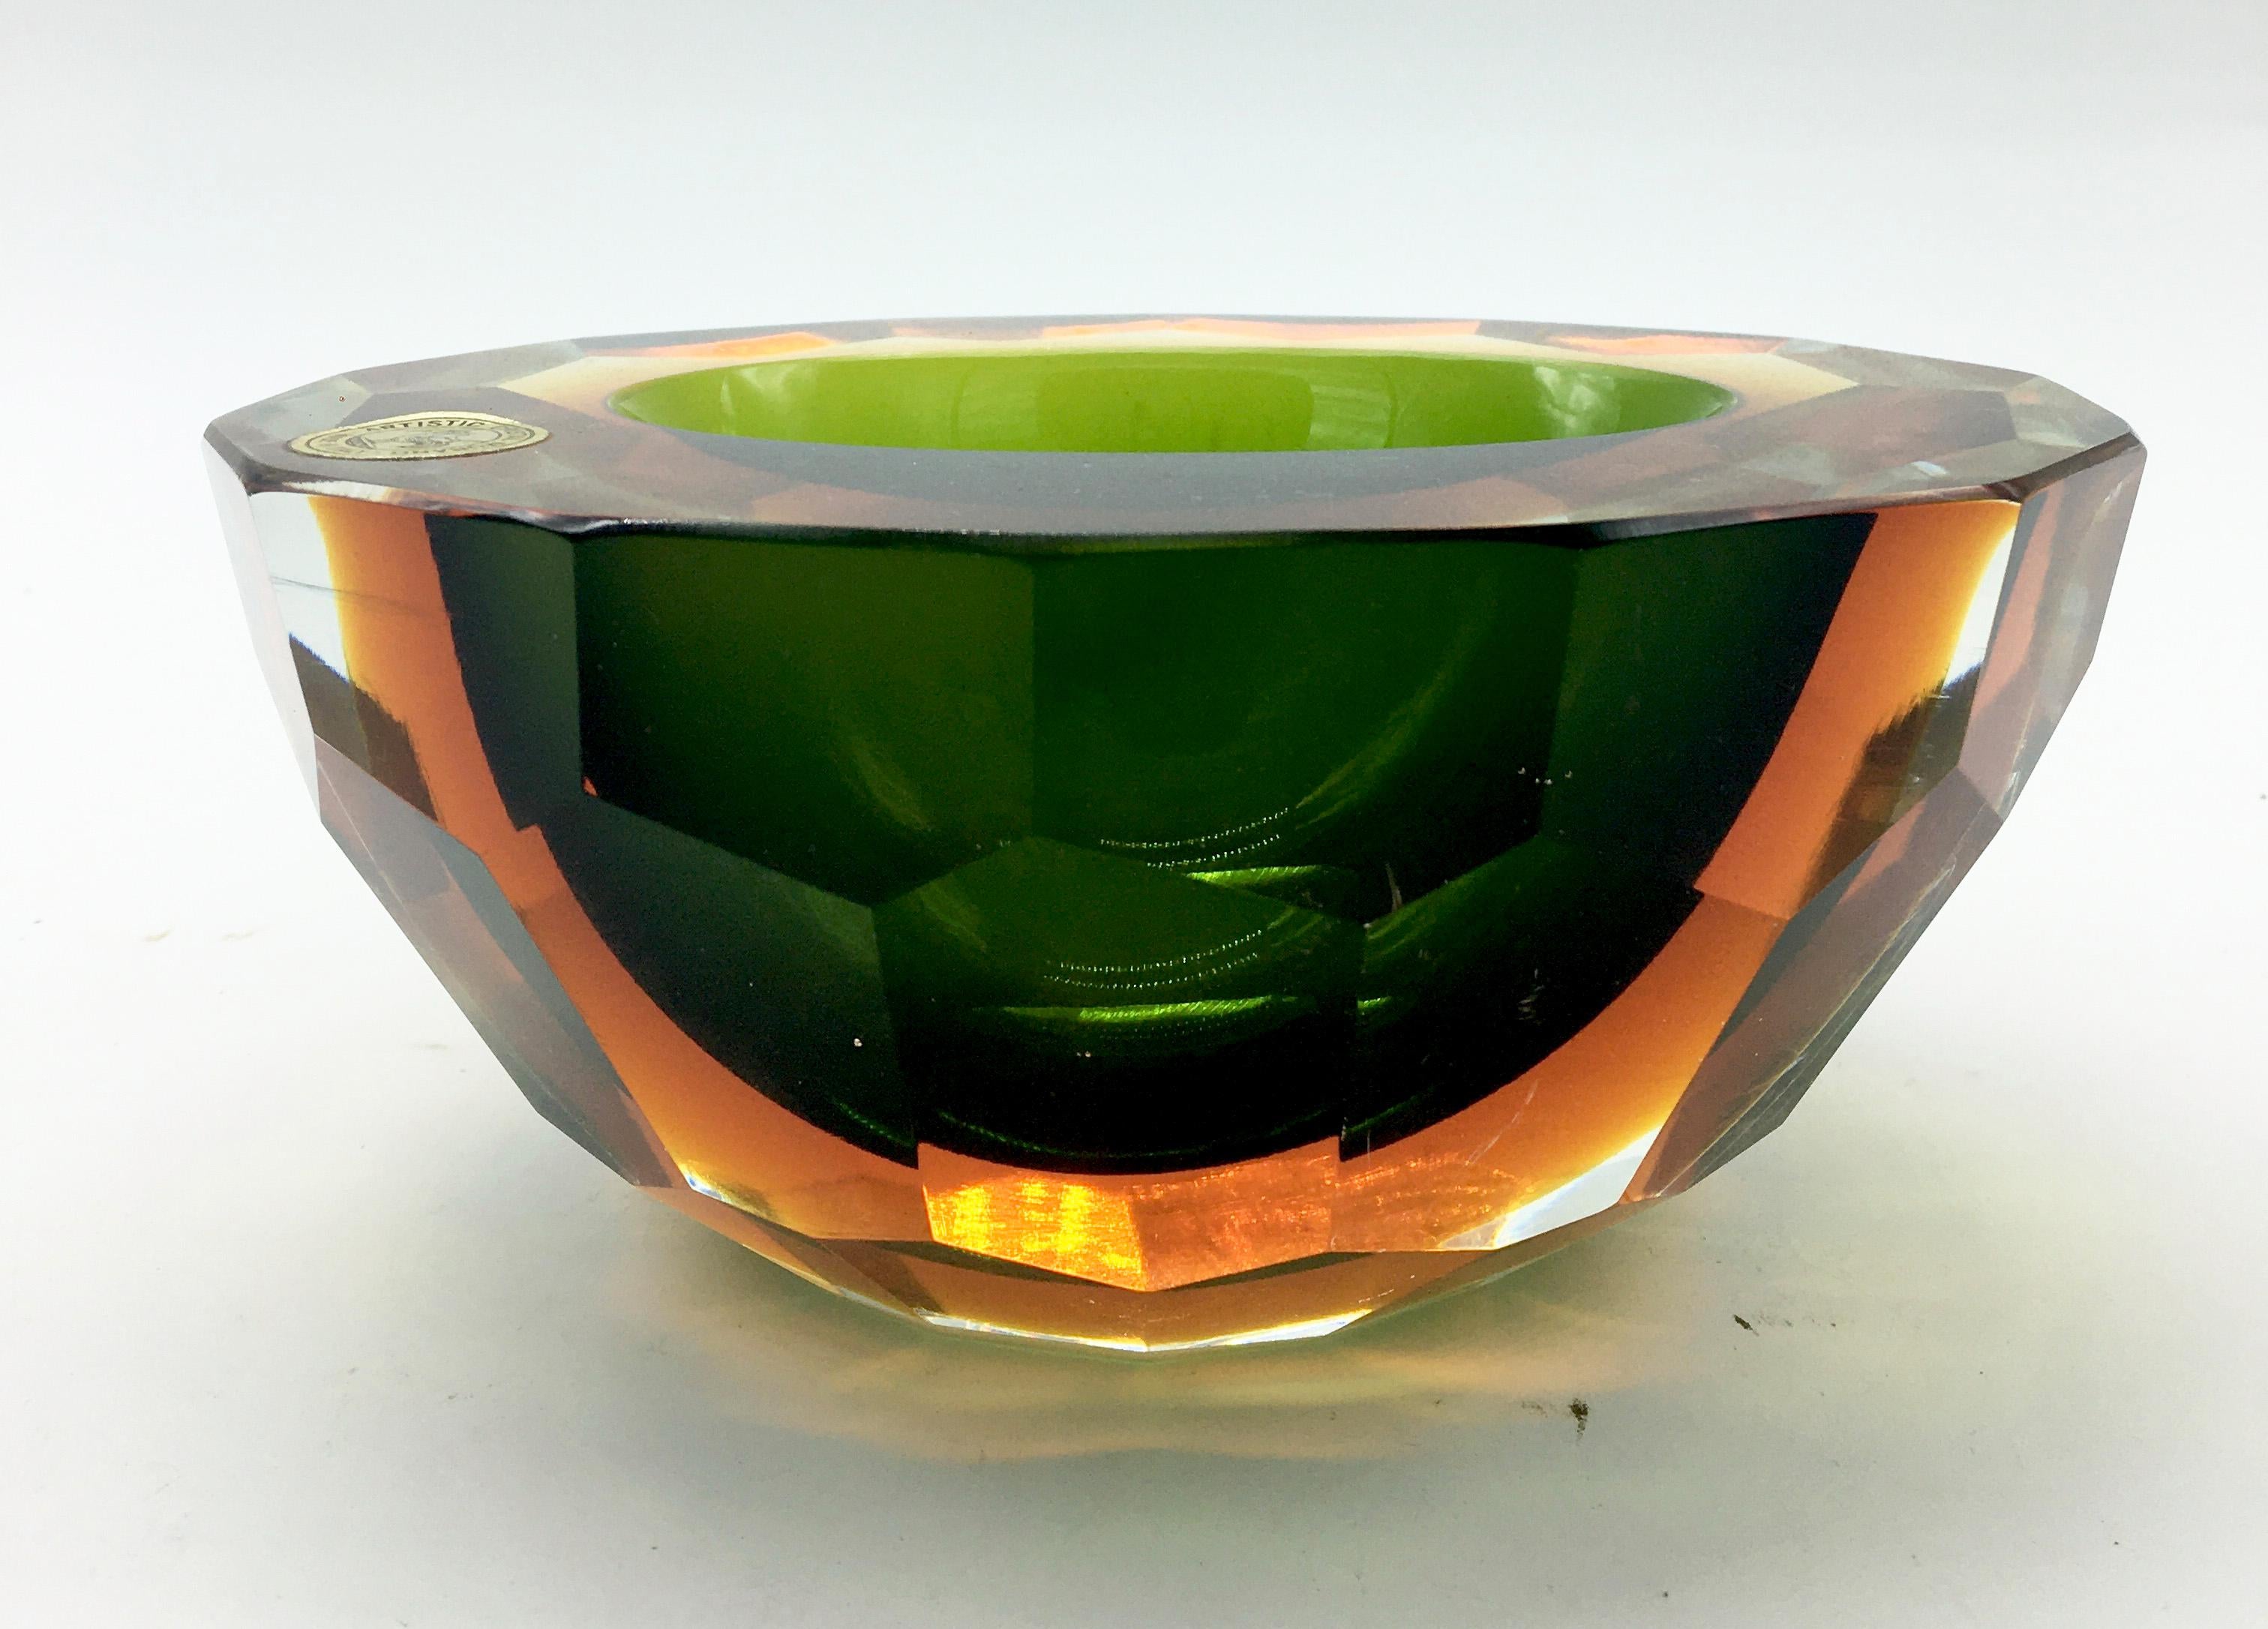 Stunning and incredible beautiful large ashtray by Flavio Poli for Seguso Vetri d’Arte, handcrafted according to the tradition of the major producers of the time.
The reflections of the colors change according to the light.
The amber color is